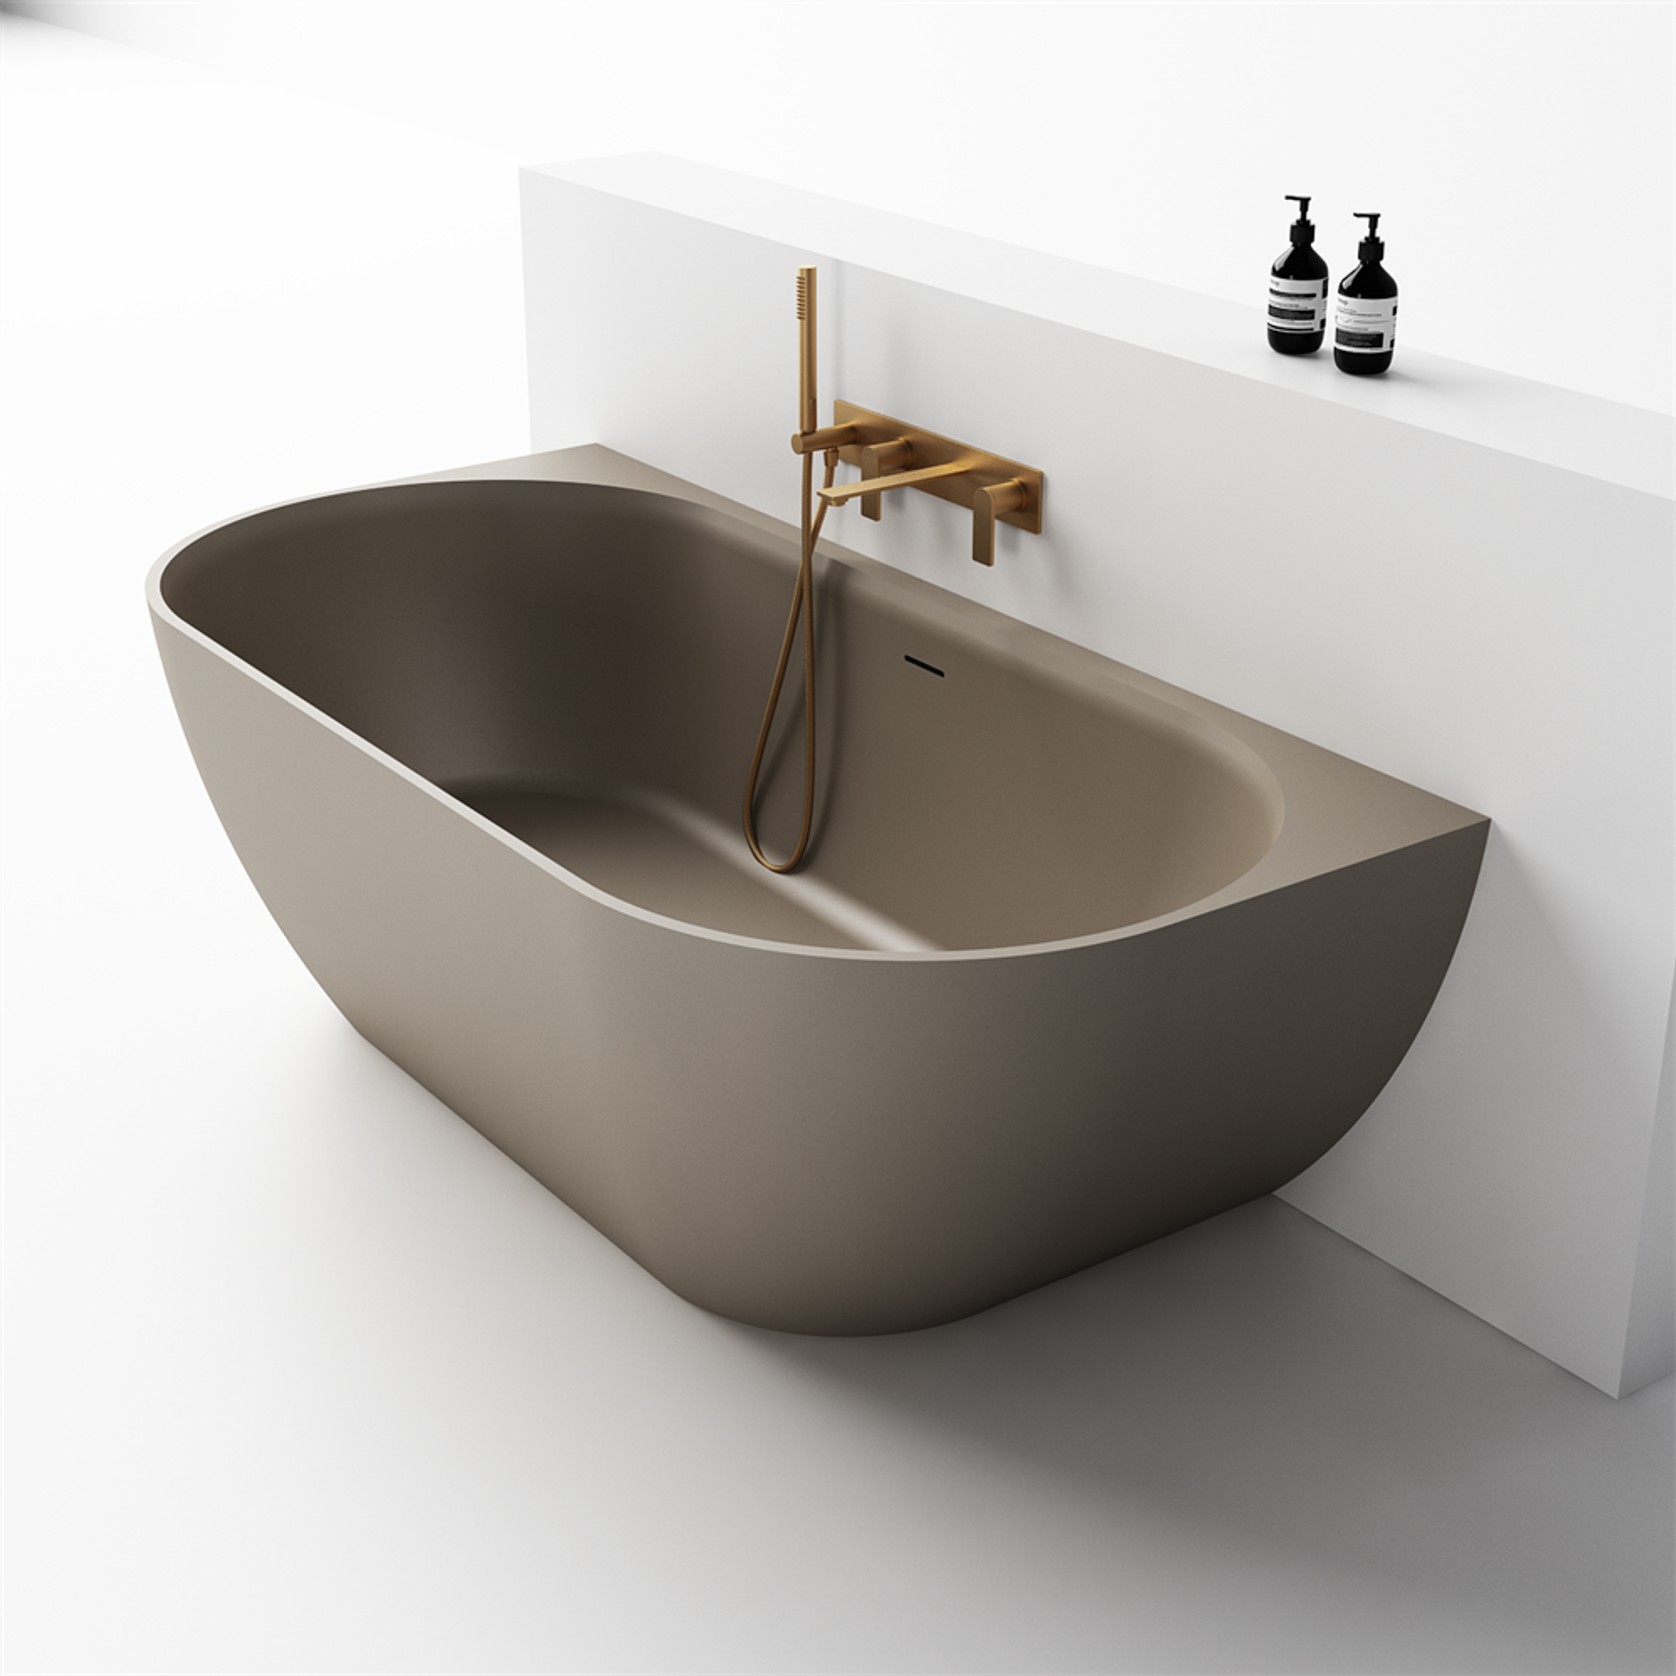 Justina back-to-wall 1700mm stone bath gallery detail image